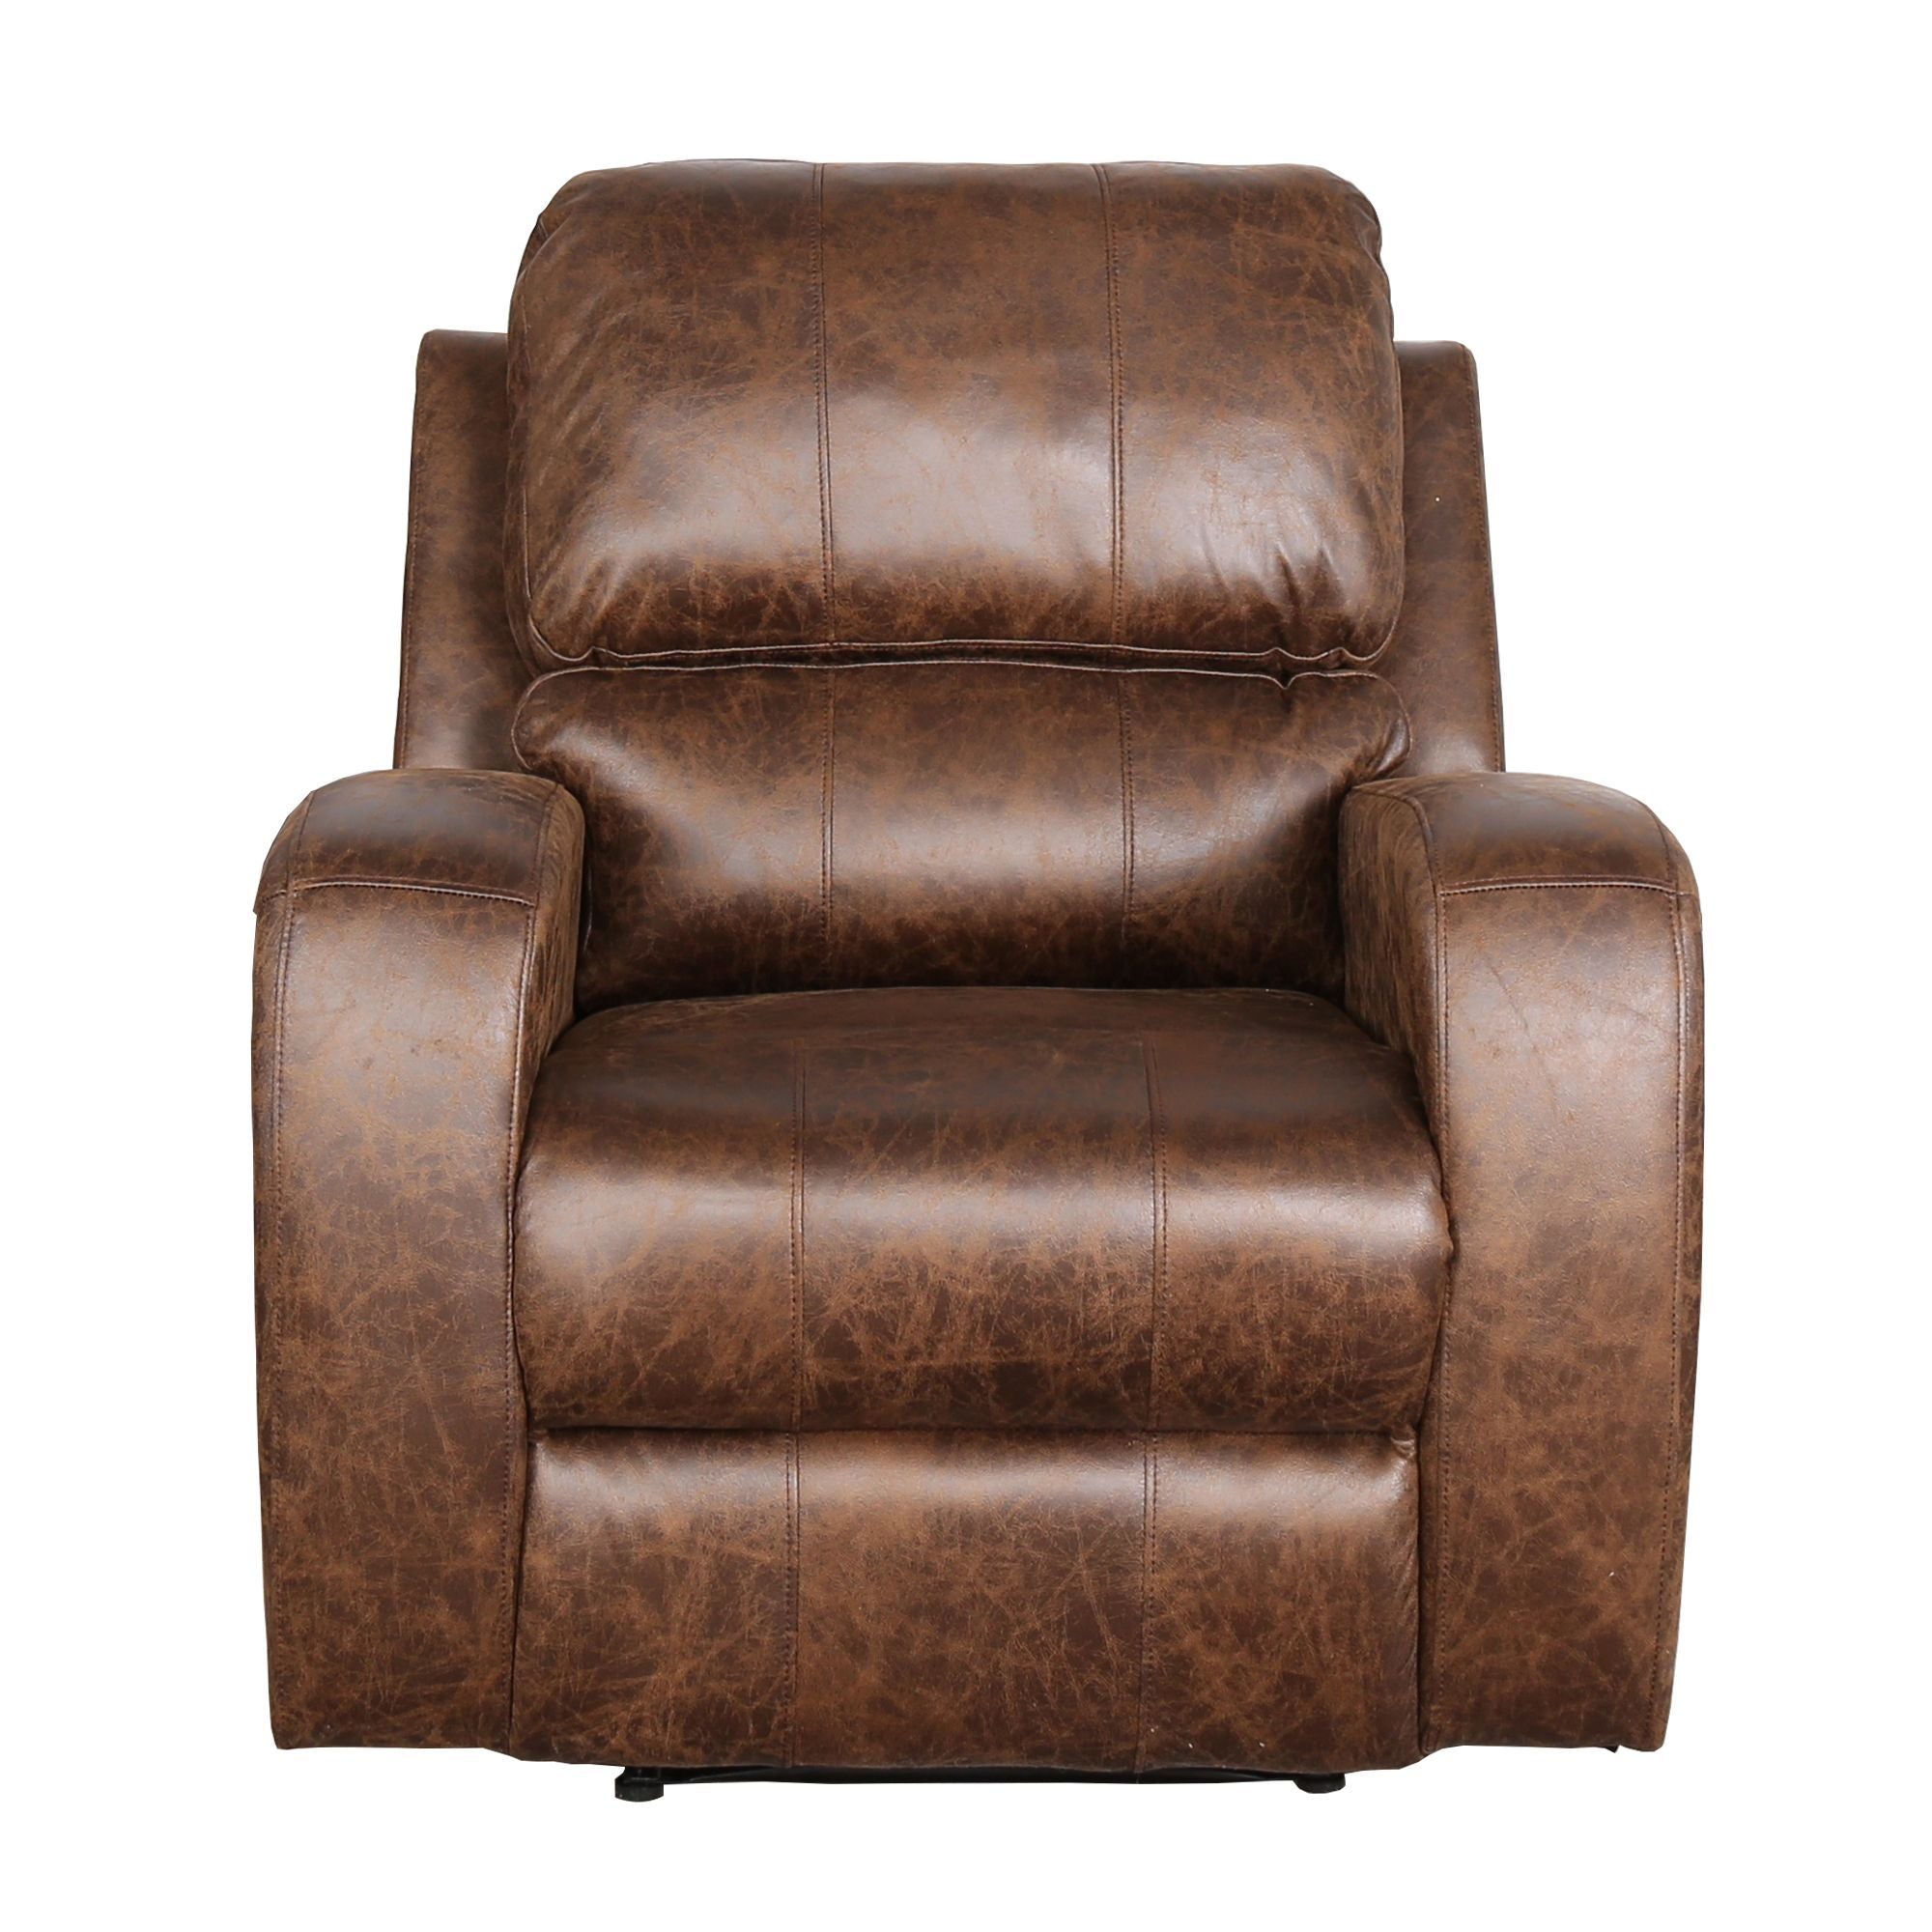 Power Electric Bonded PU Leather Recliner Chair with USB Charge Port, Vintage Home Theater Seating,Classic Single Sofa Seat-Nut Brown-Boyel Living